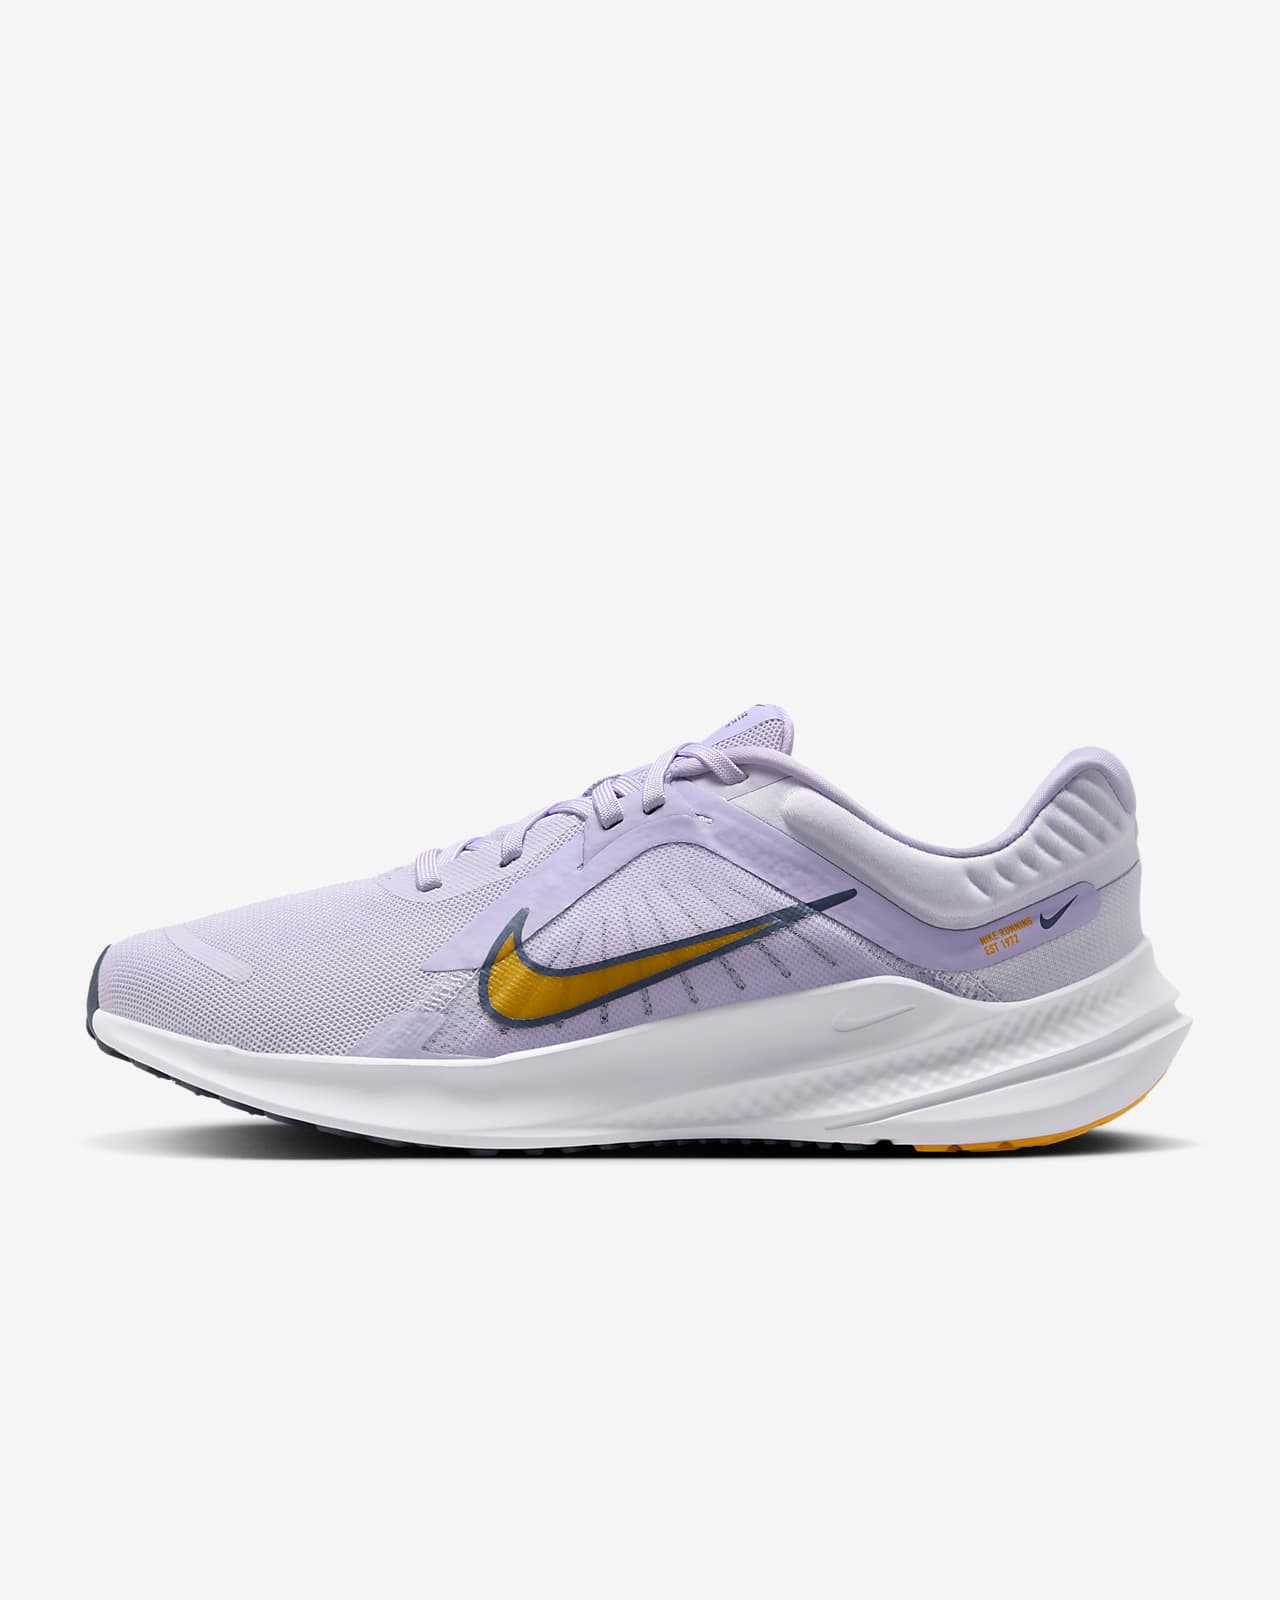 Nike Quest 5 Women's Road Running Shoes